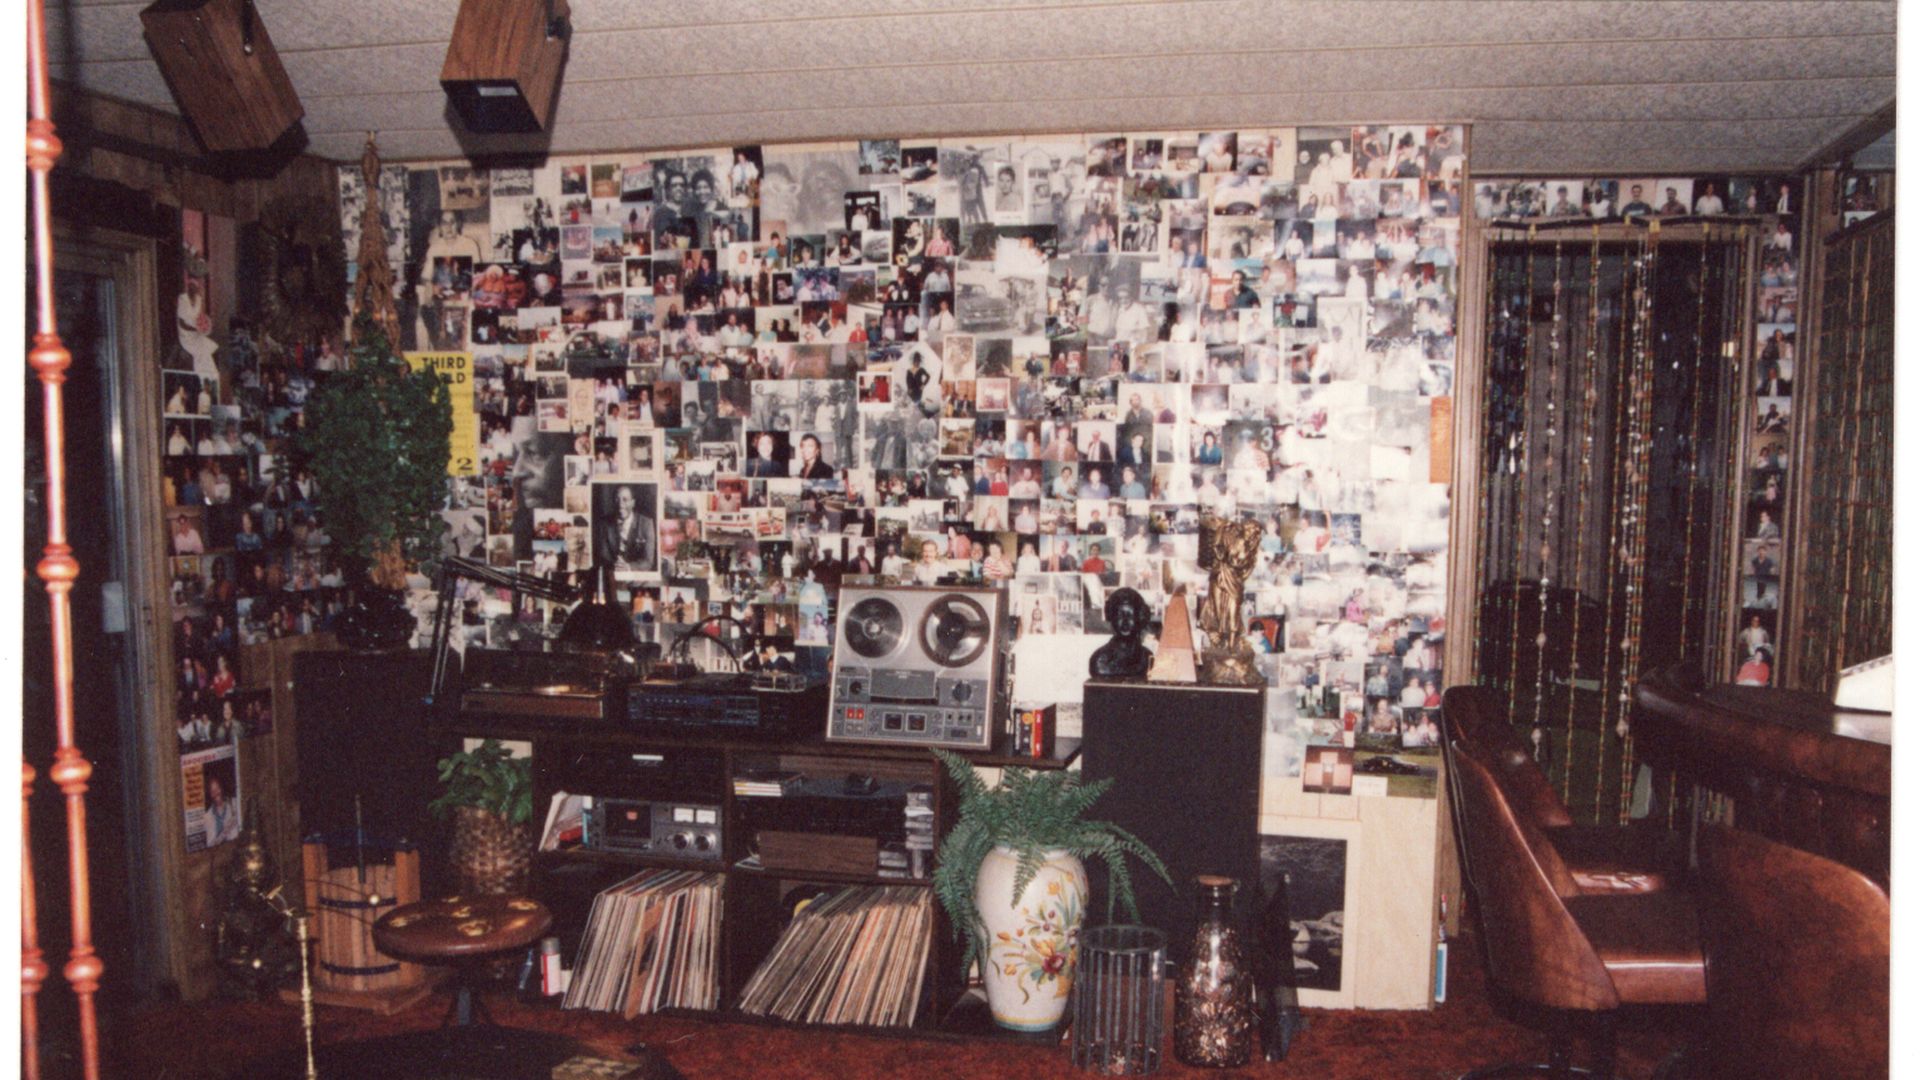 A room with vinyl LPs hi-fi equipment a reel-to-reel tape player and a wall of photographs of musicians